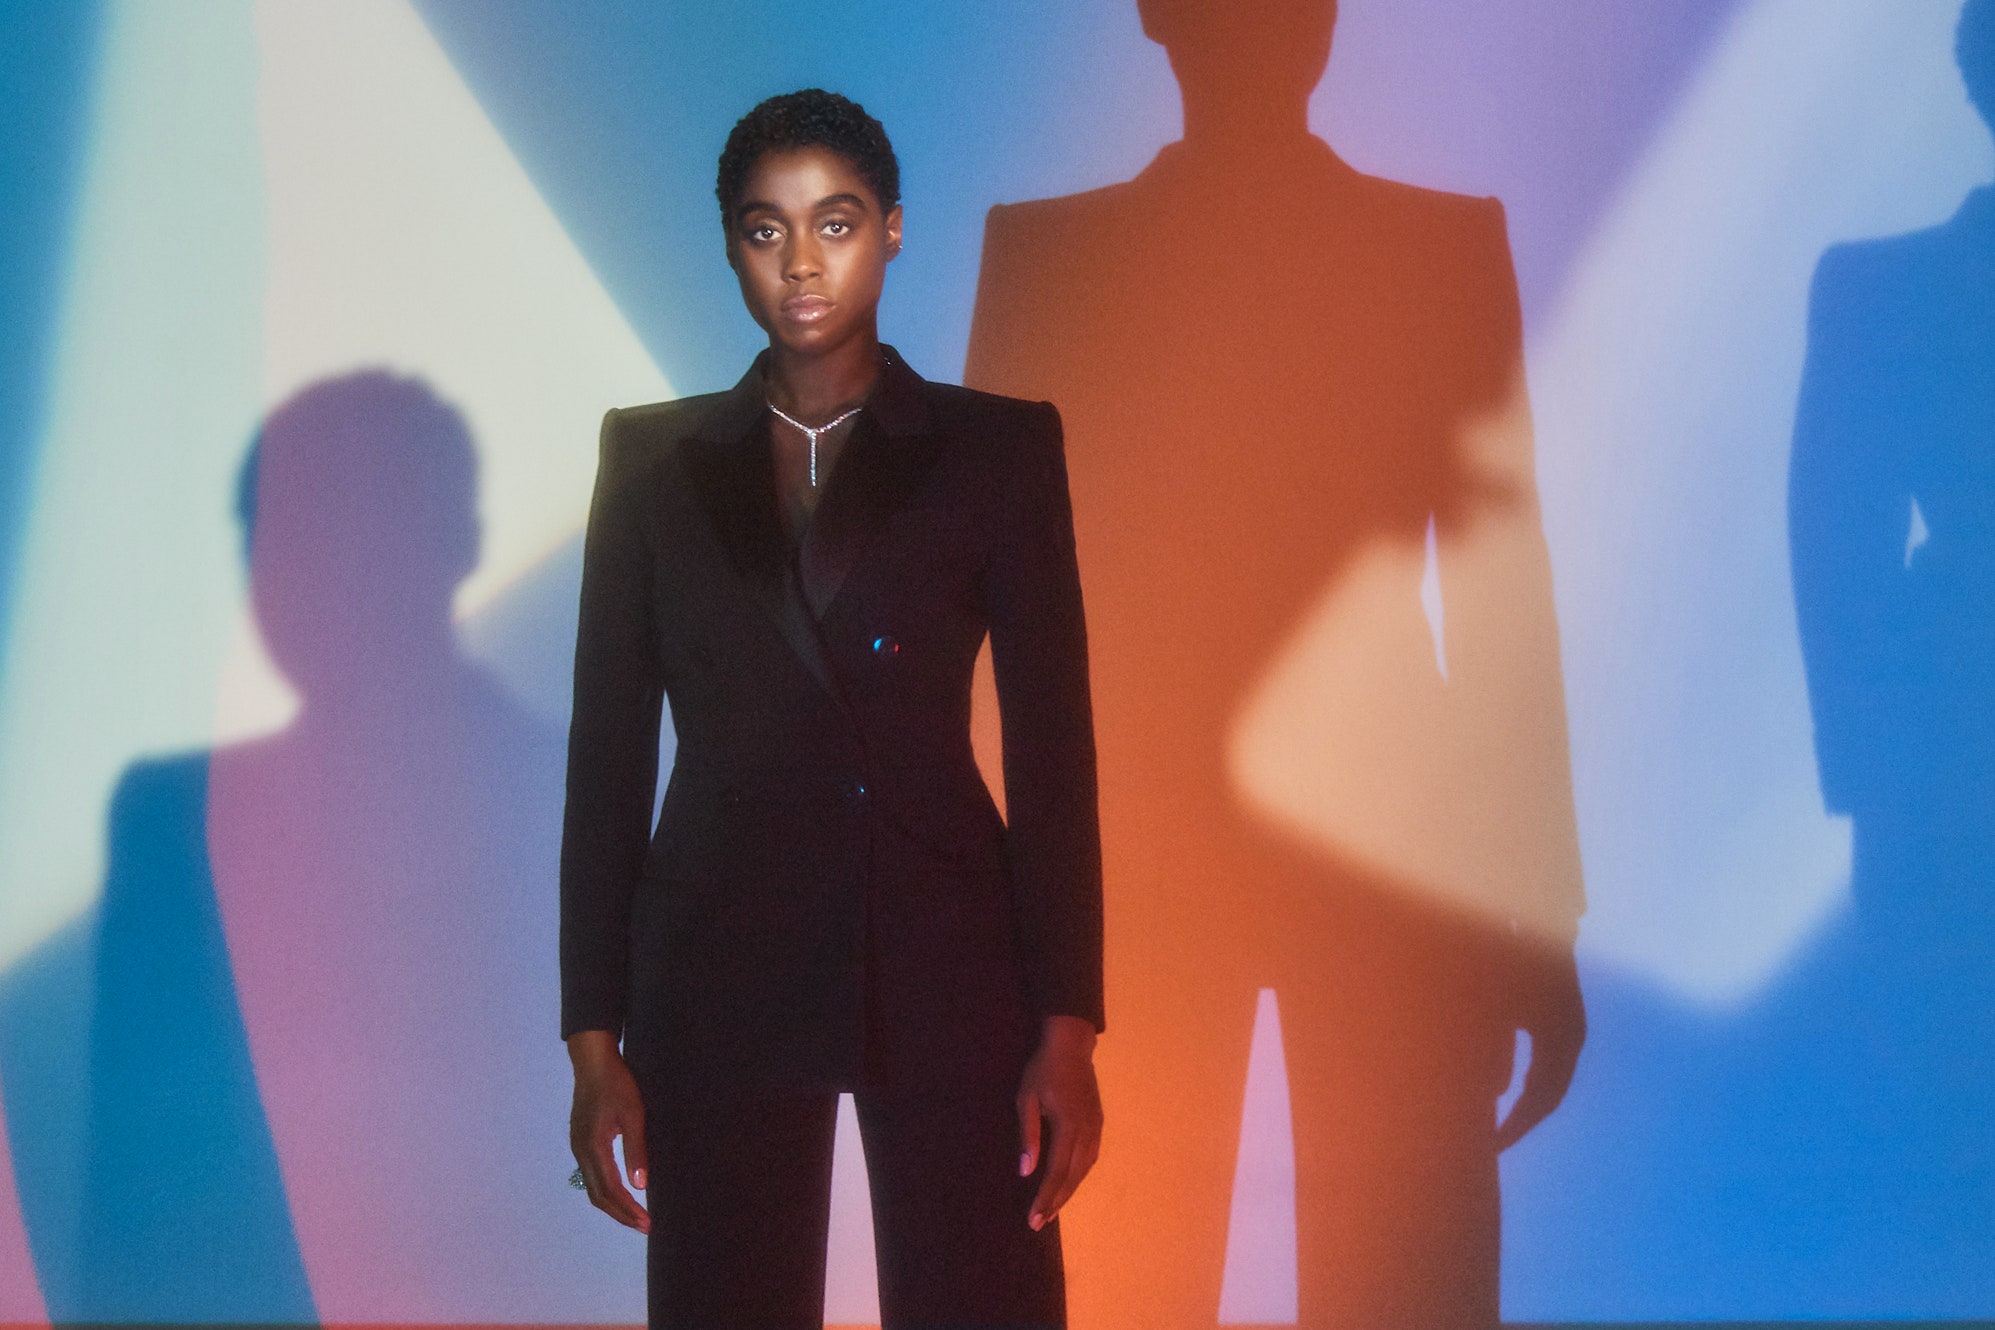 Lashana Lynch As Nomi No Time To Die Wallpapers